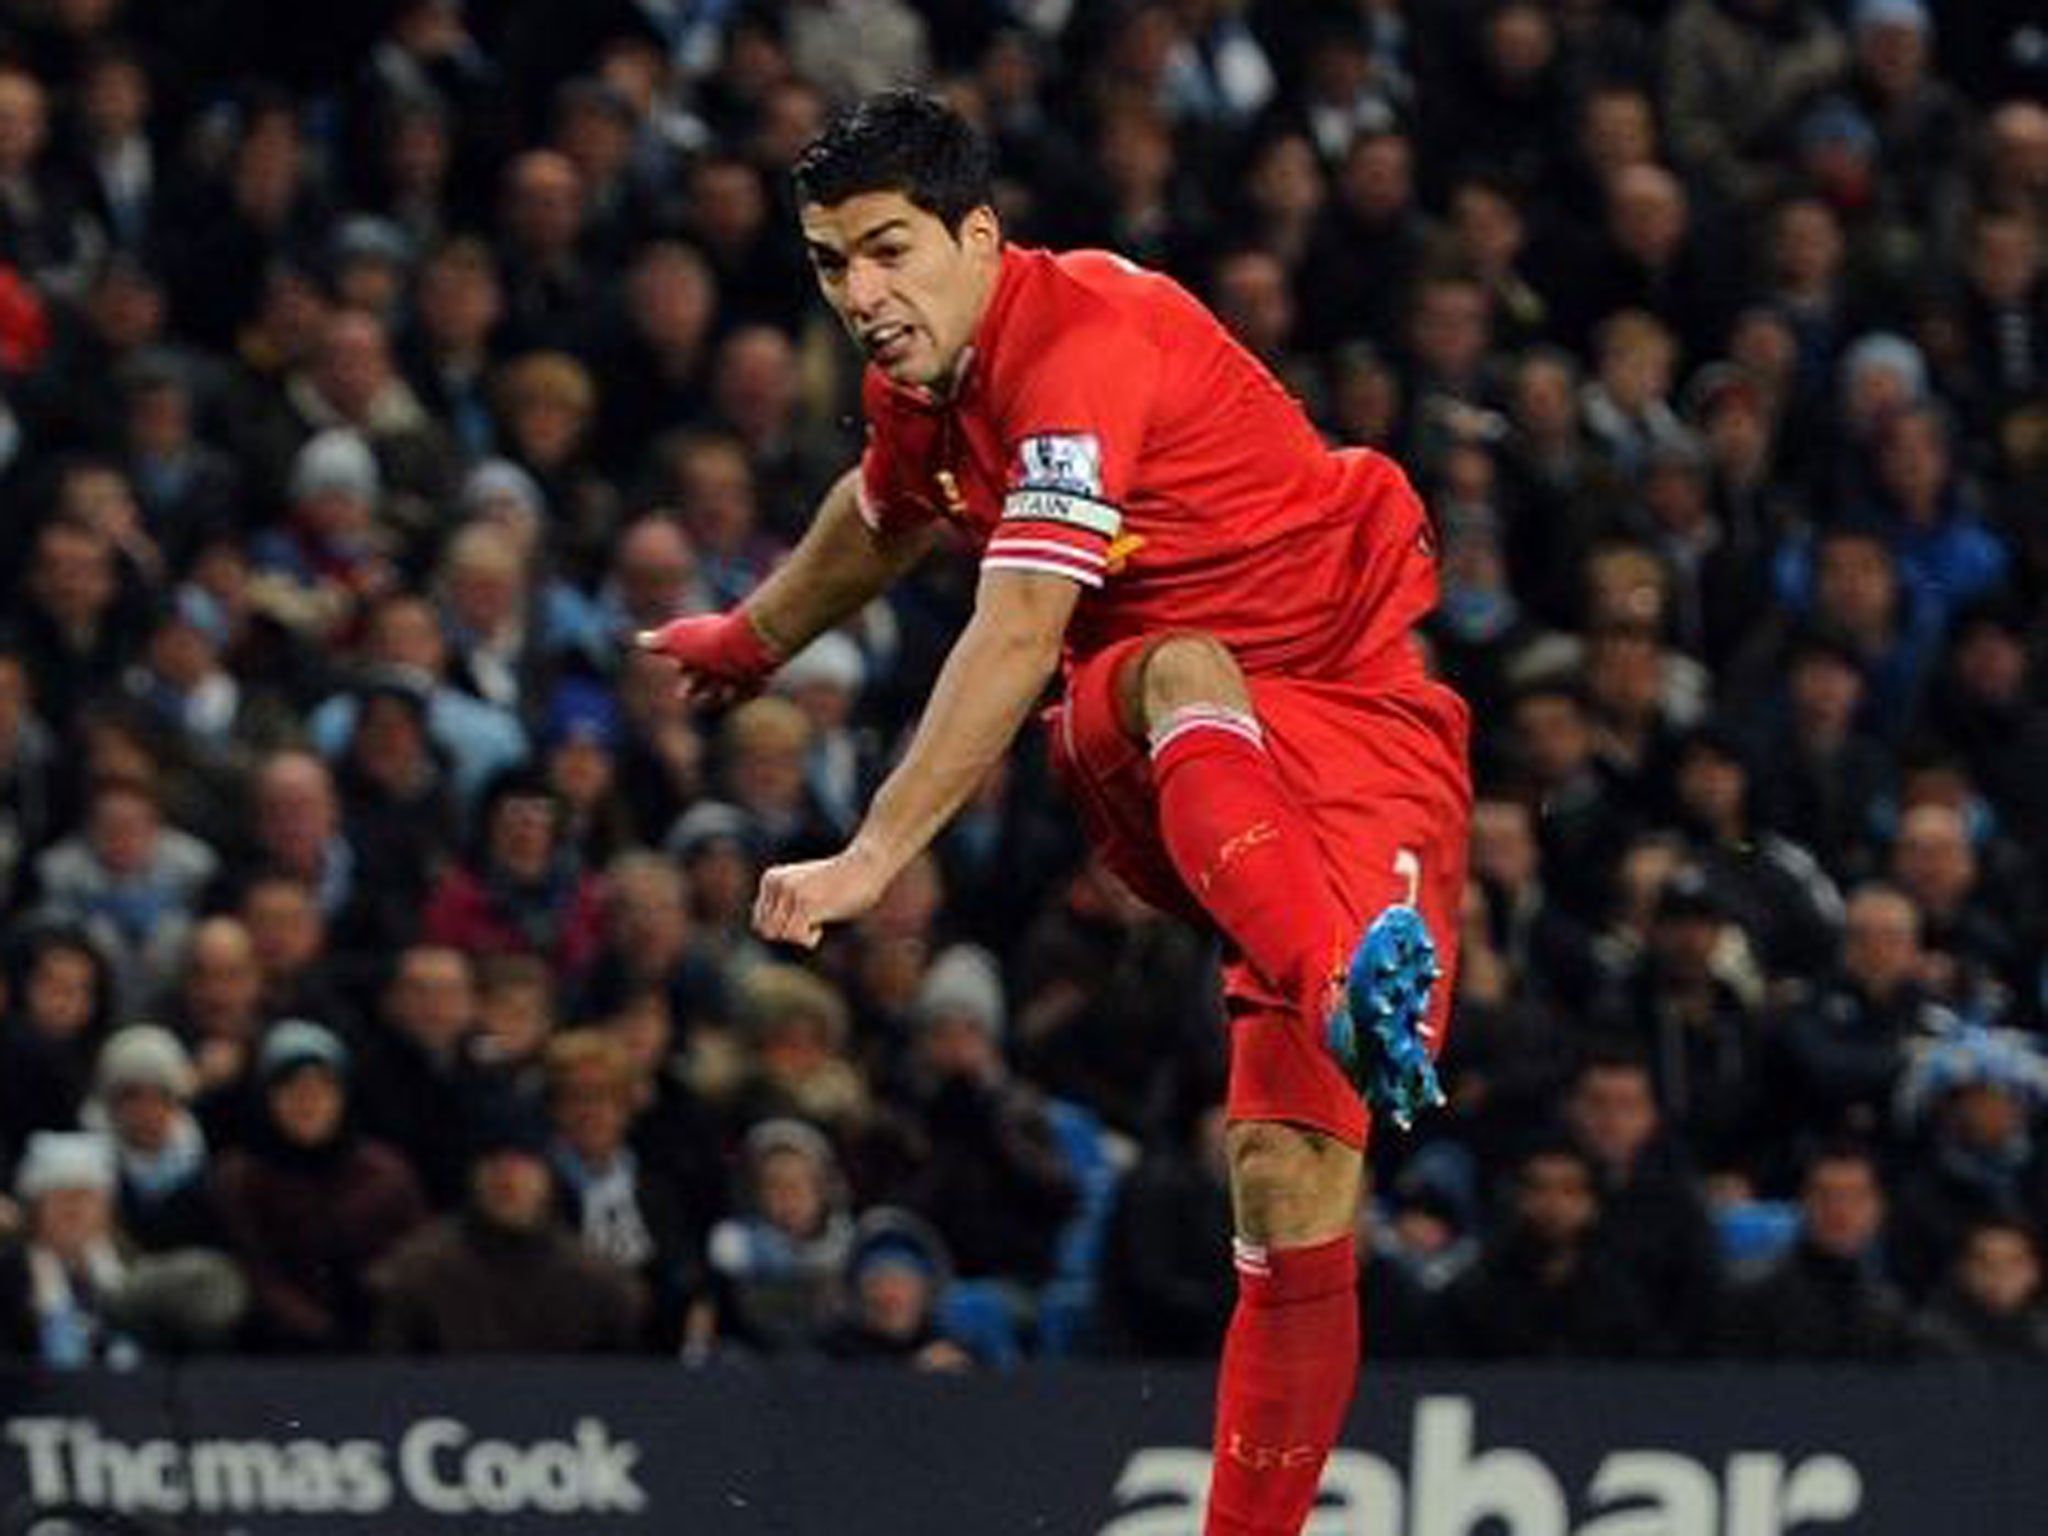 Luis Suarez of Liverpool comes close during the Barclays Premier League match between Manchester United and Liverpool